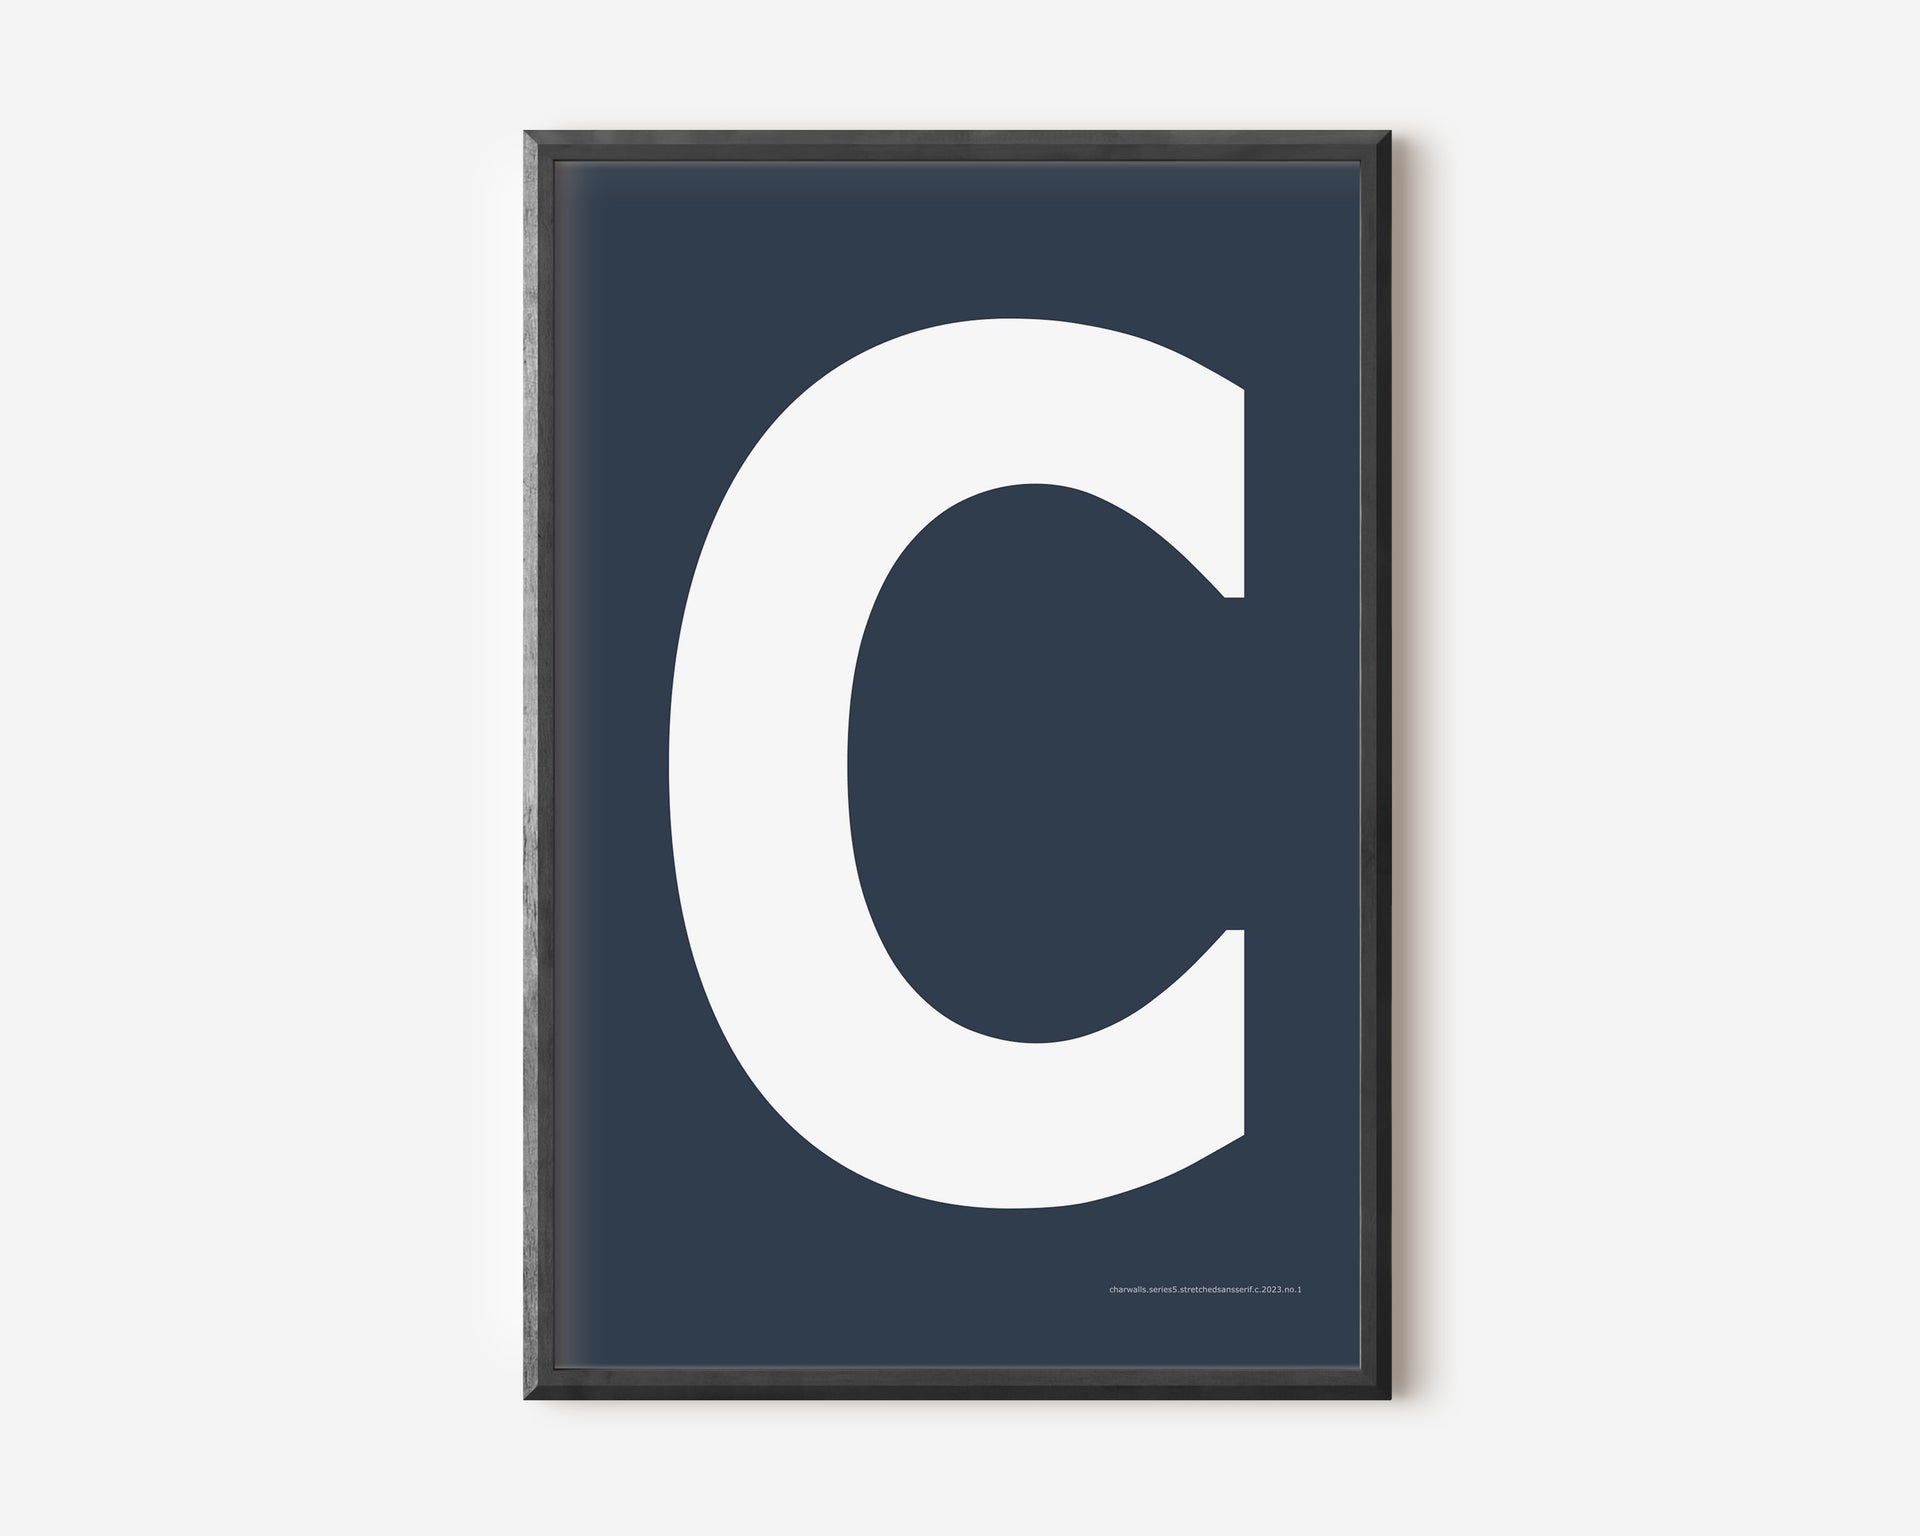 Modern art print with an uppercase white letter C on a navy blue background.